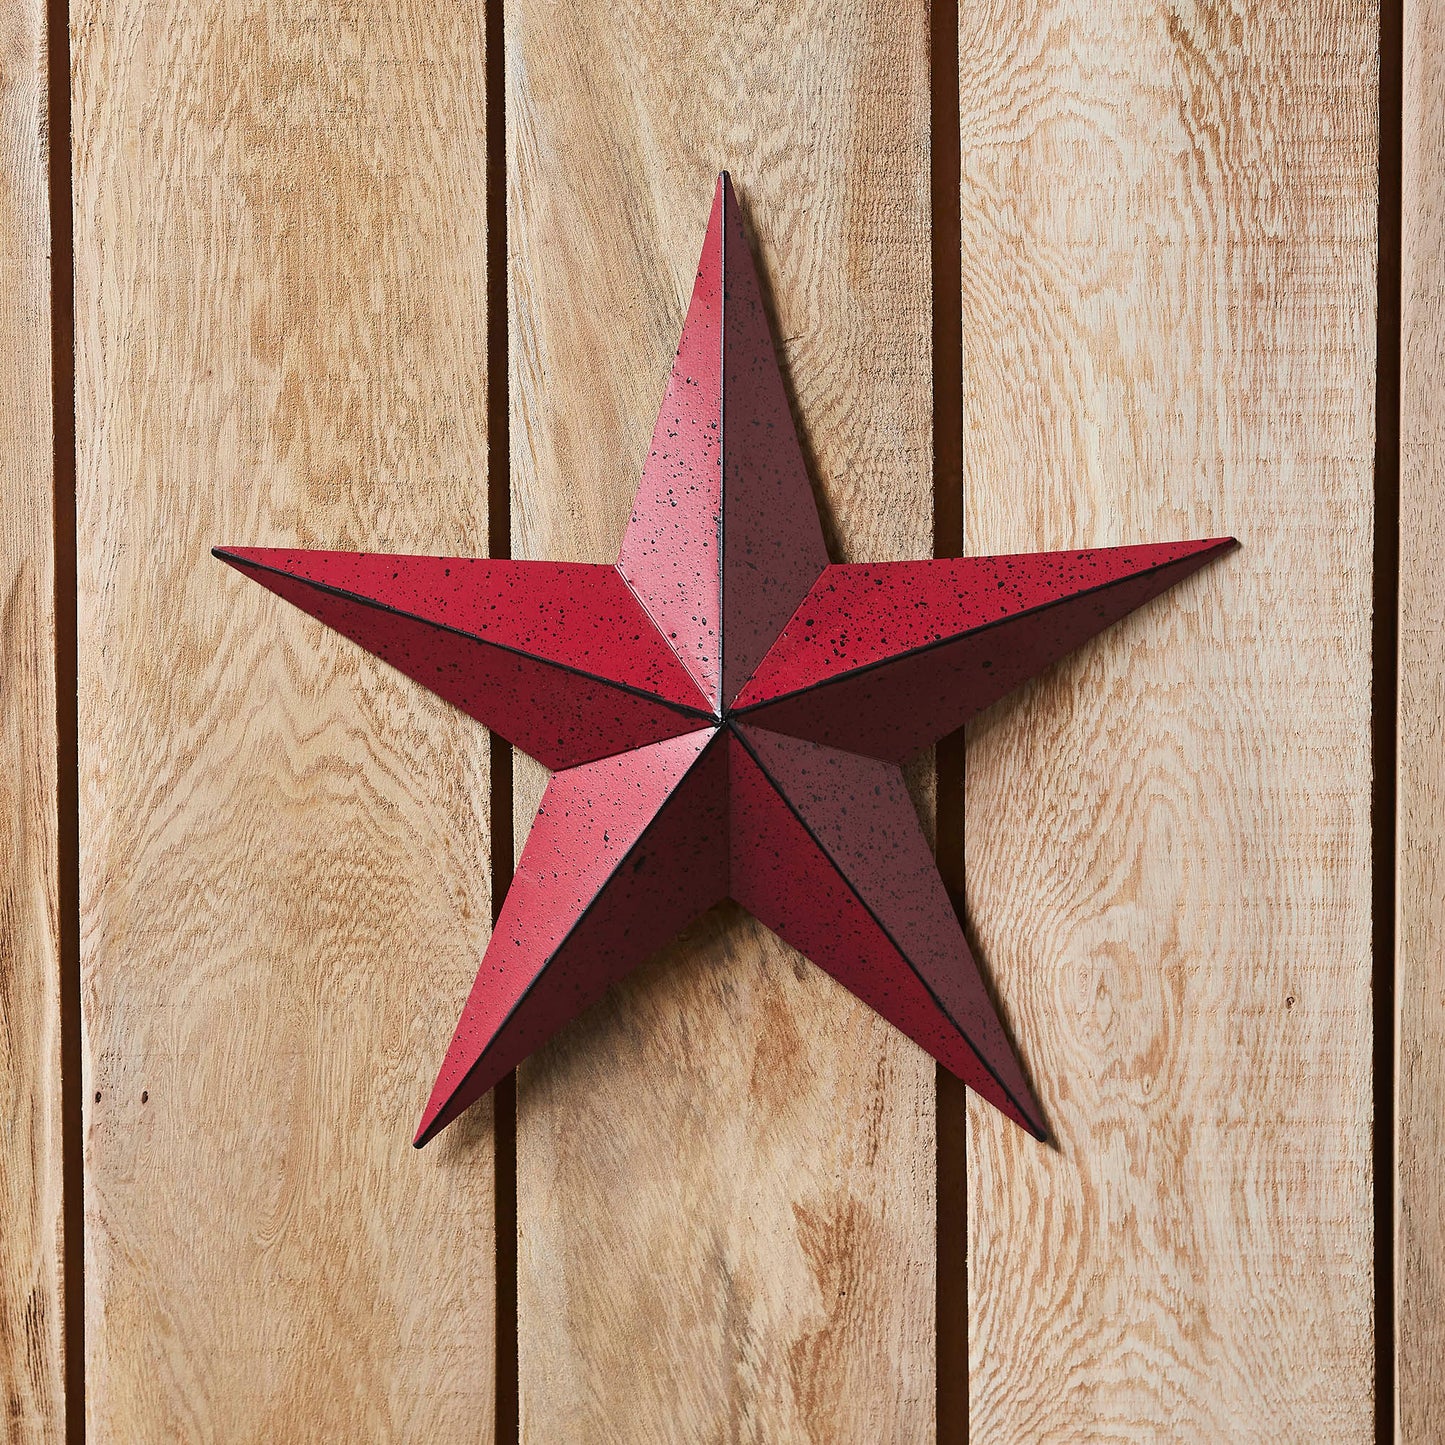 VHC Brands Patriotic Faceted Metal Star Burgundy Wall Hanging 12x12, Independence Day Decor, American Star Design, Distressed Appearance Metal Wall Hanging,  Star Shape, Country, Burgundy